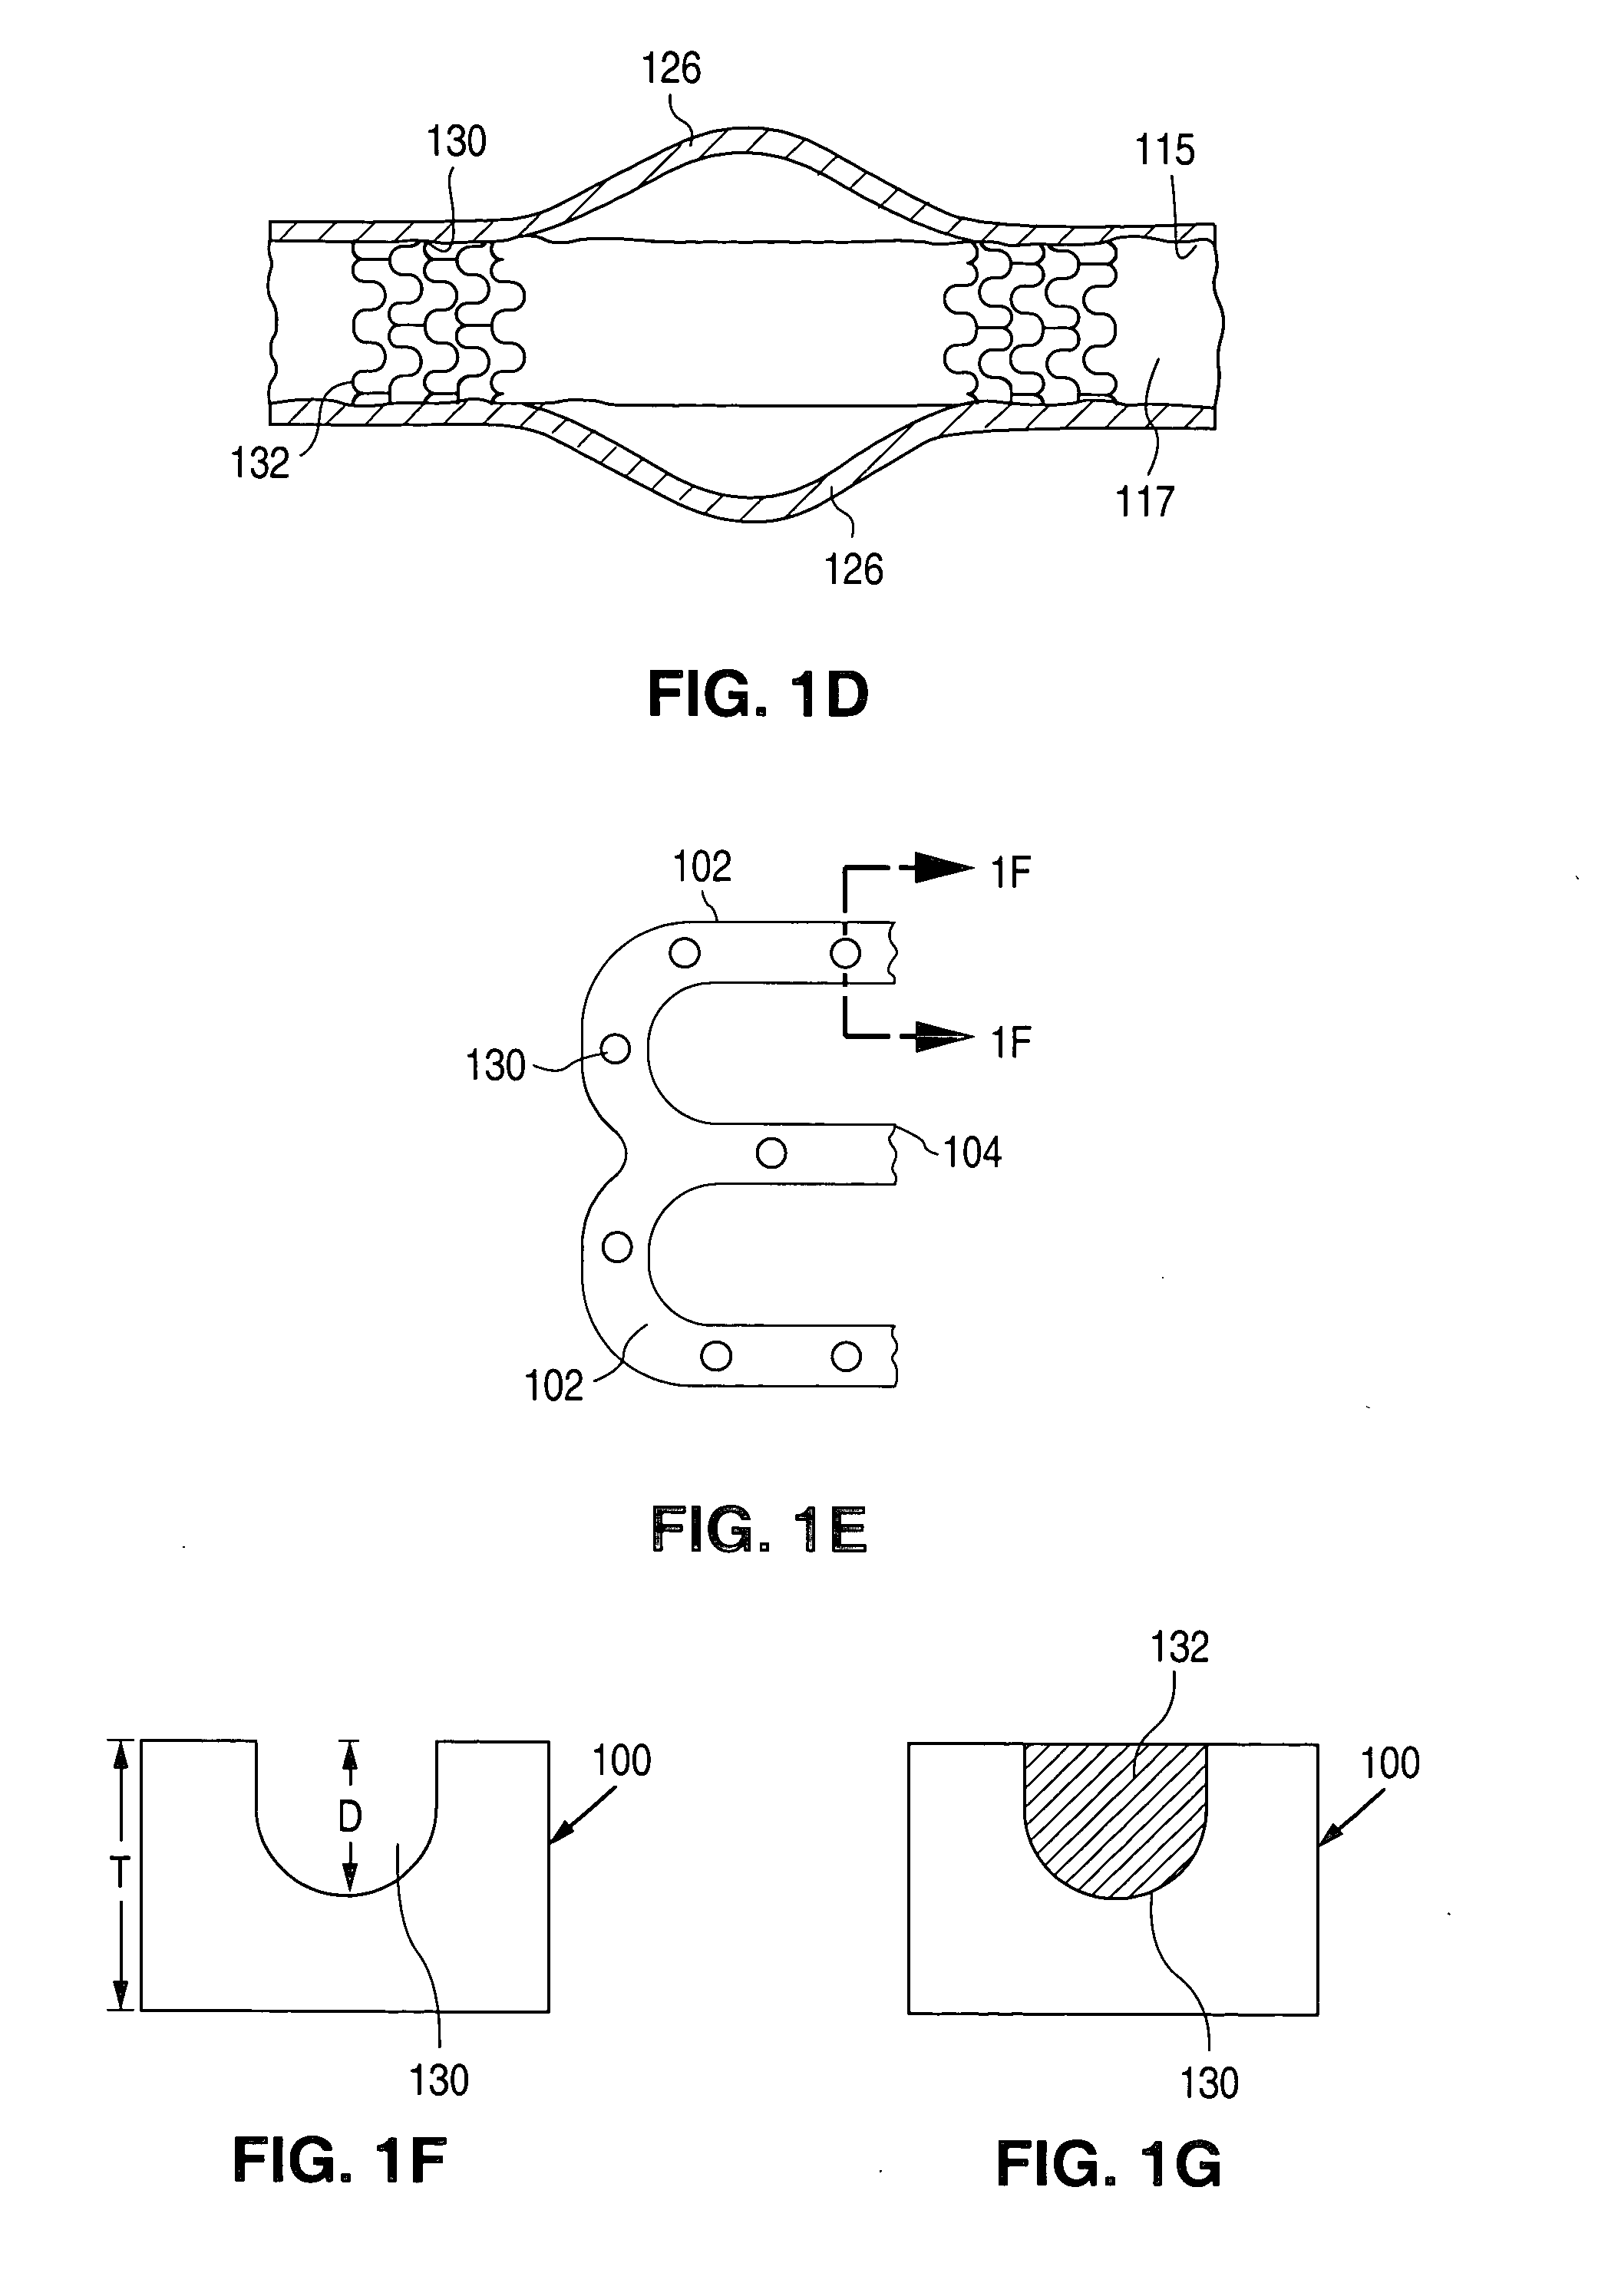 Method of making an implantable medical device